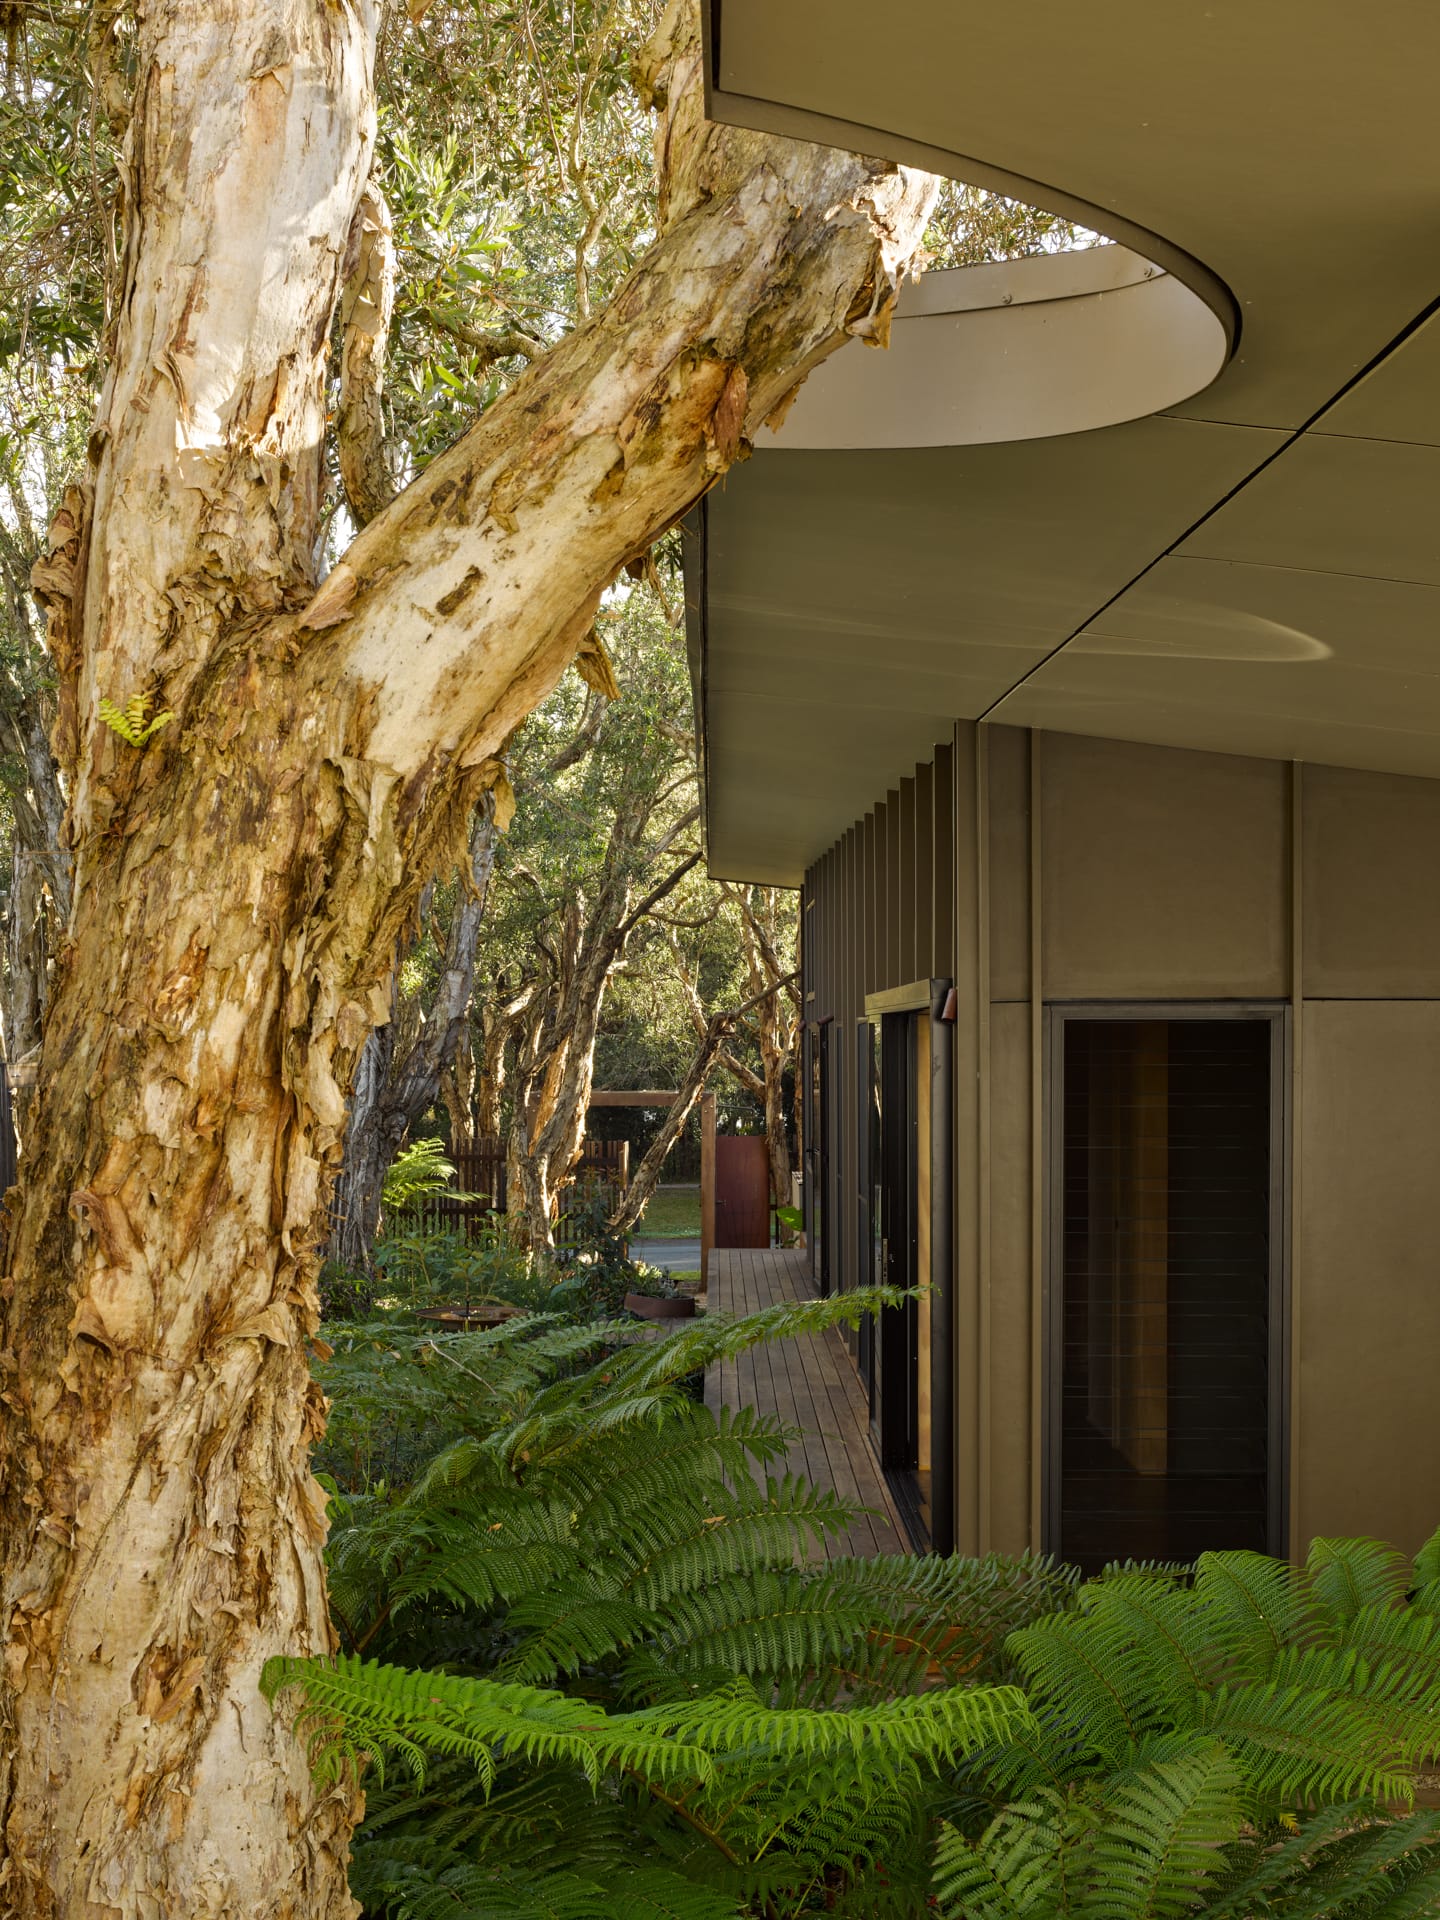 PaperBark Pod by Bark Design. Photography by Christopher Frederick Jones. Side of home clad with fibre cement panels. Lots of low ferns and paperbark trees growing. Roof features circular cut out.